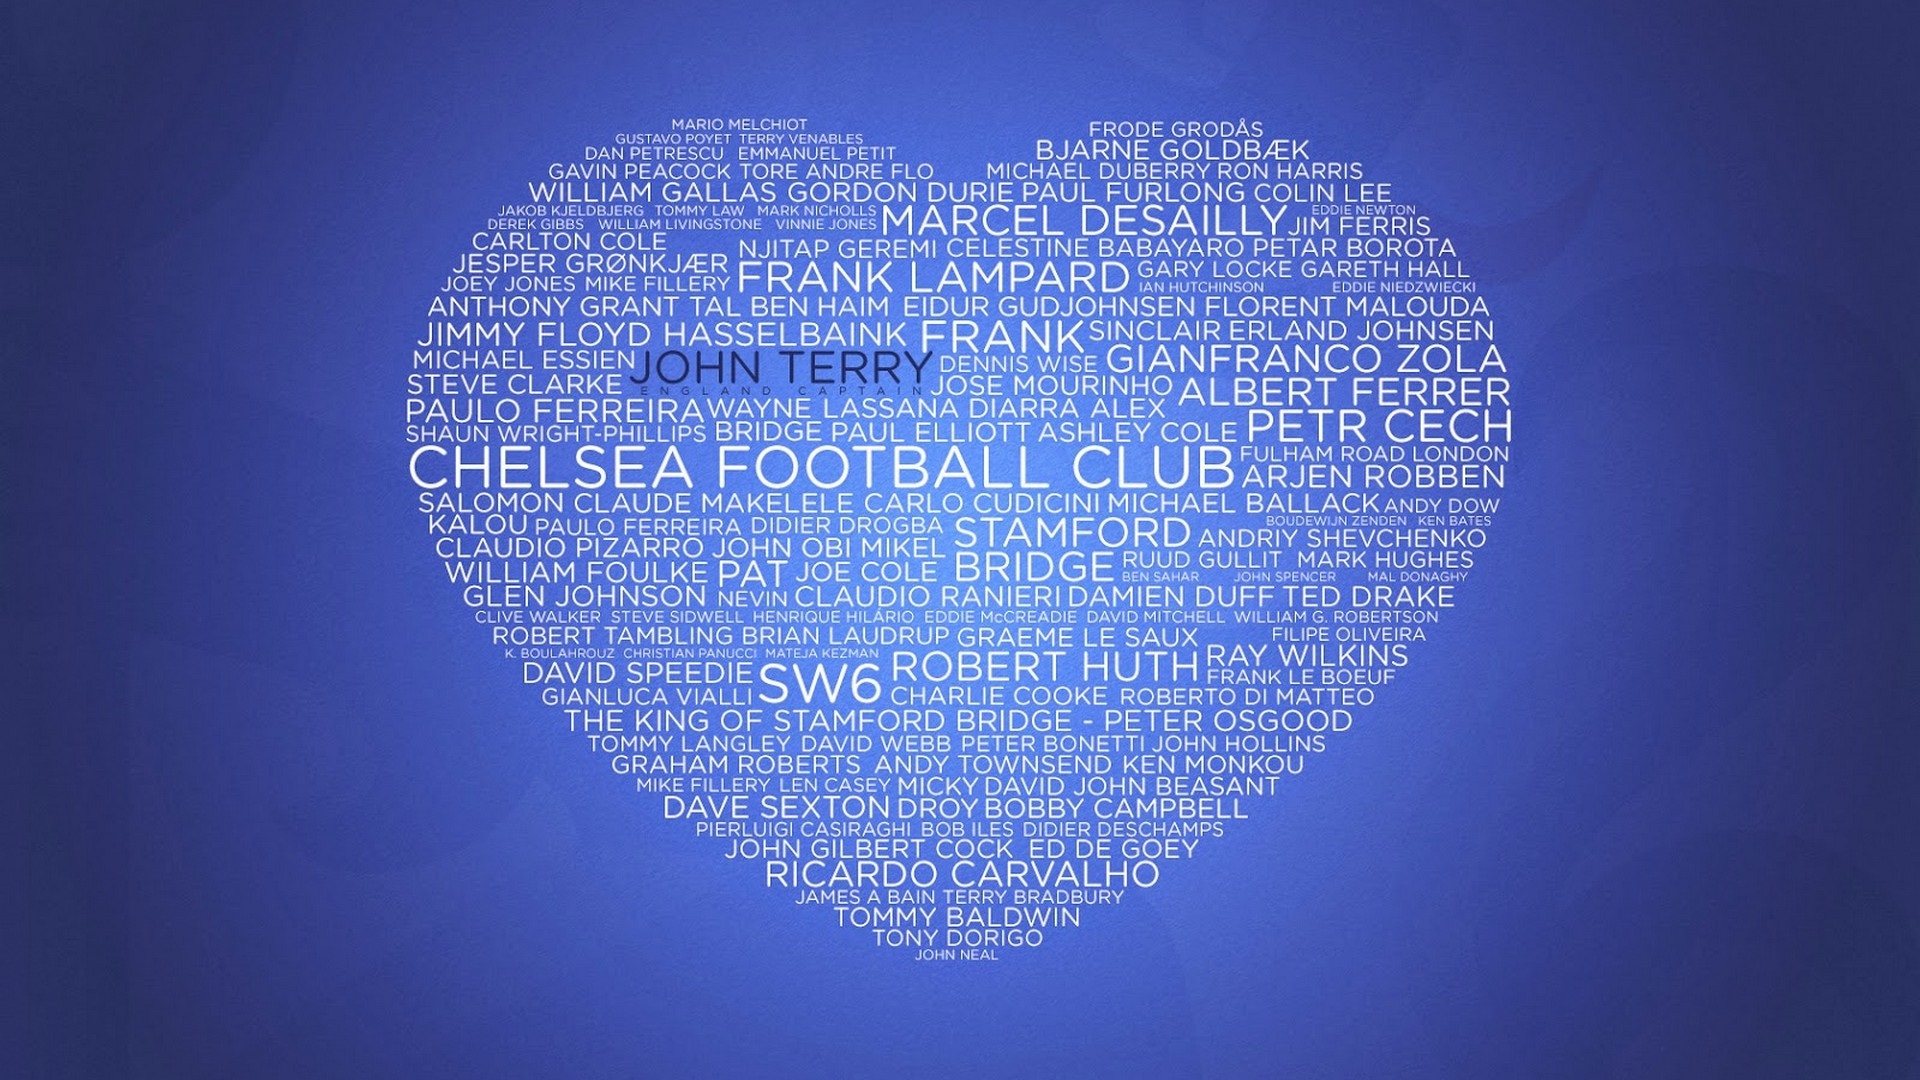 Wallpapers HD Chelsea Football Club with resolution 1920x1080 pixel. You can make this wallpaper for your Mac or Windows Desktop Background, iPhone, Android or Tablet and another Smartphone device